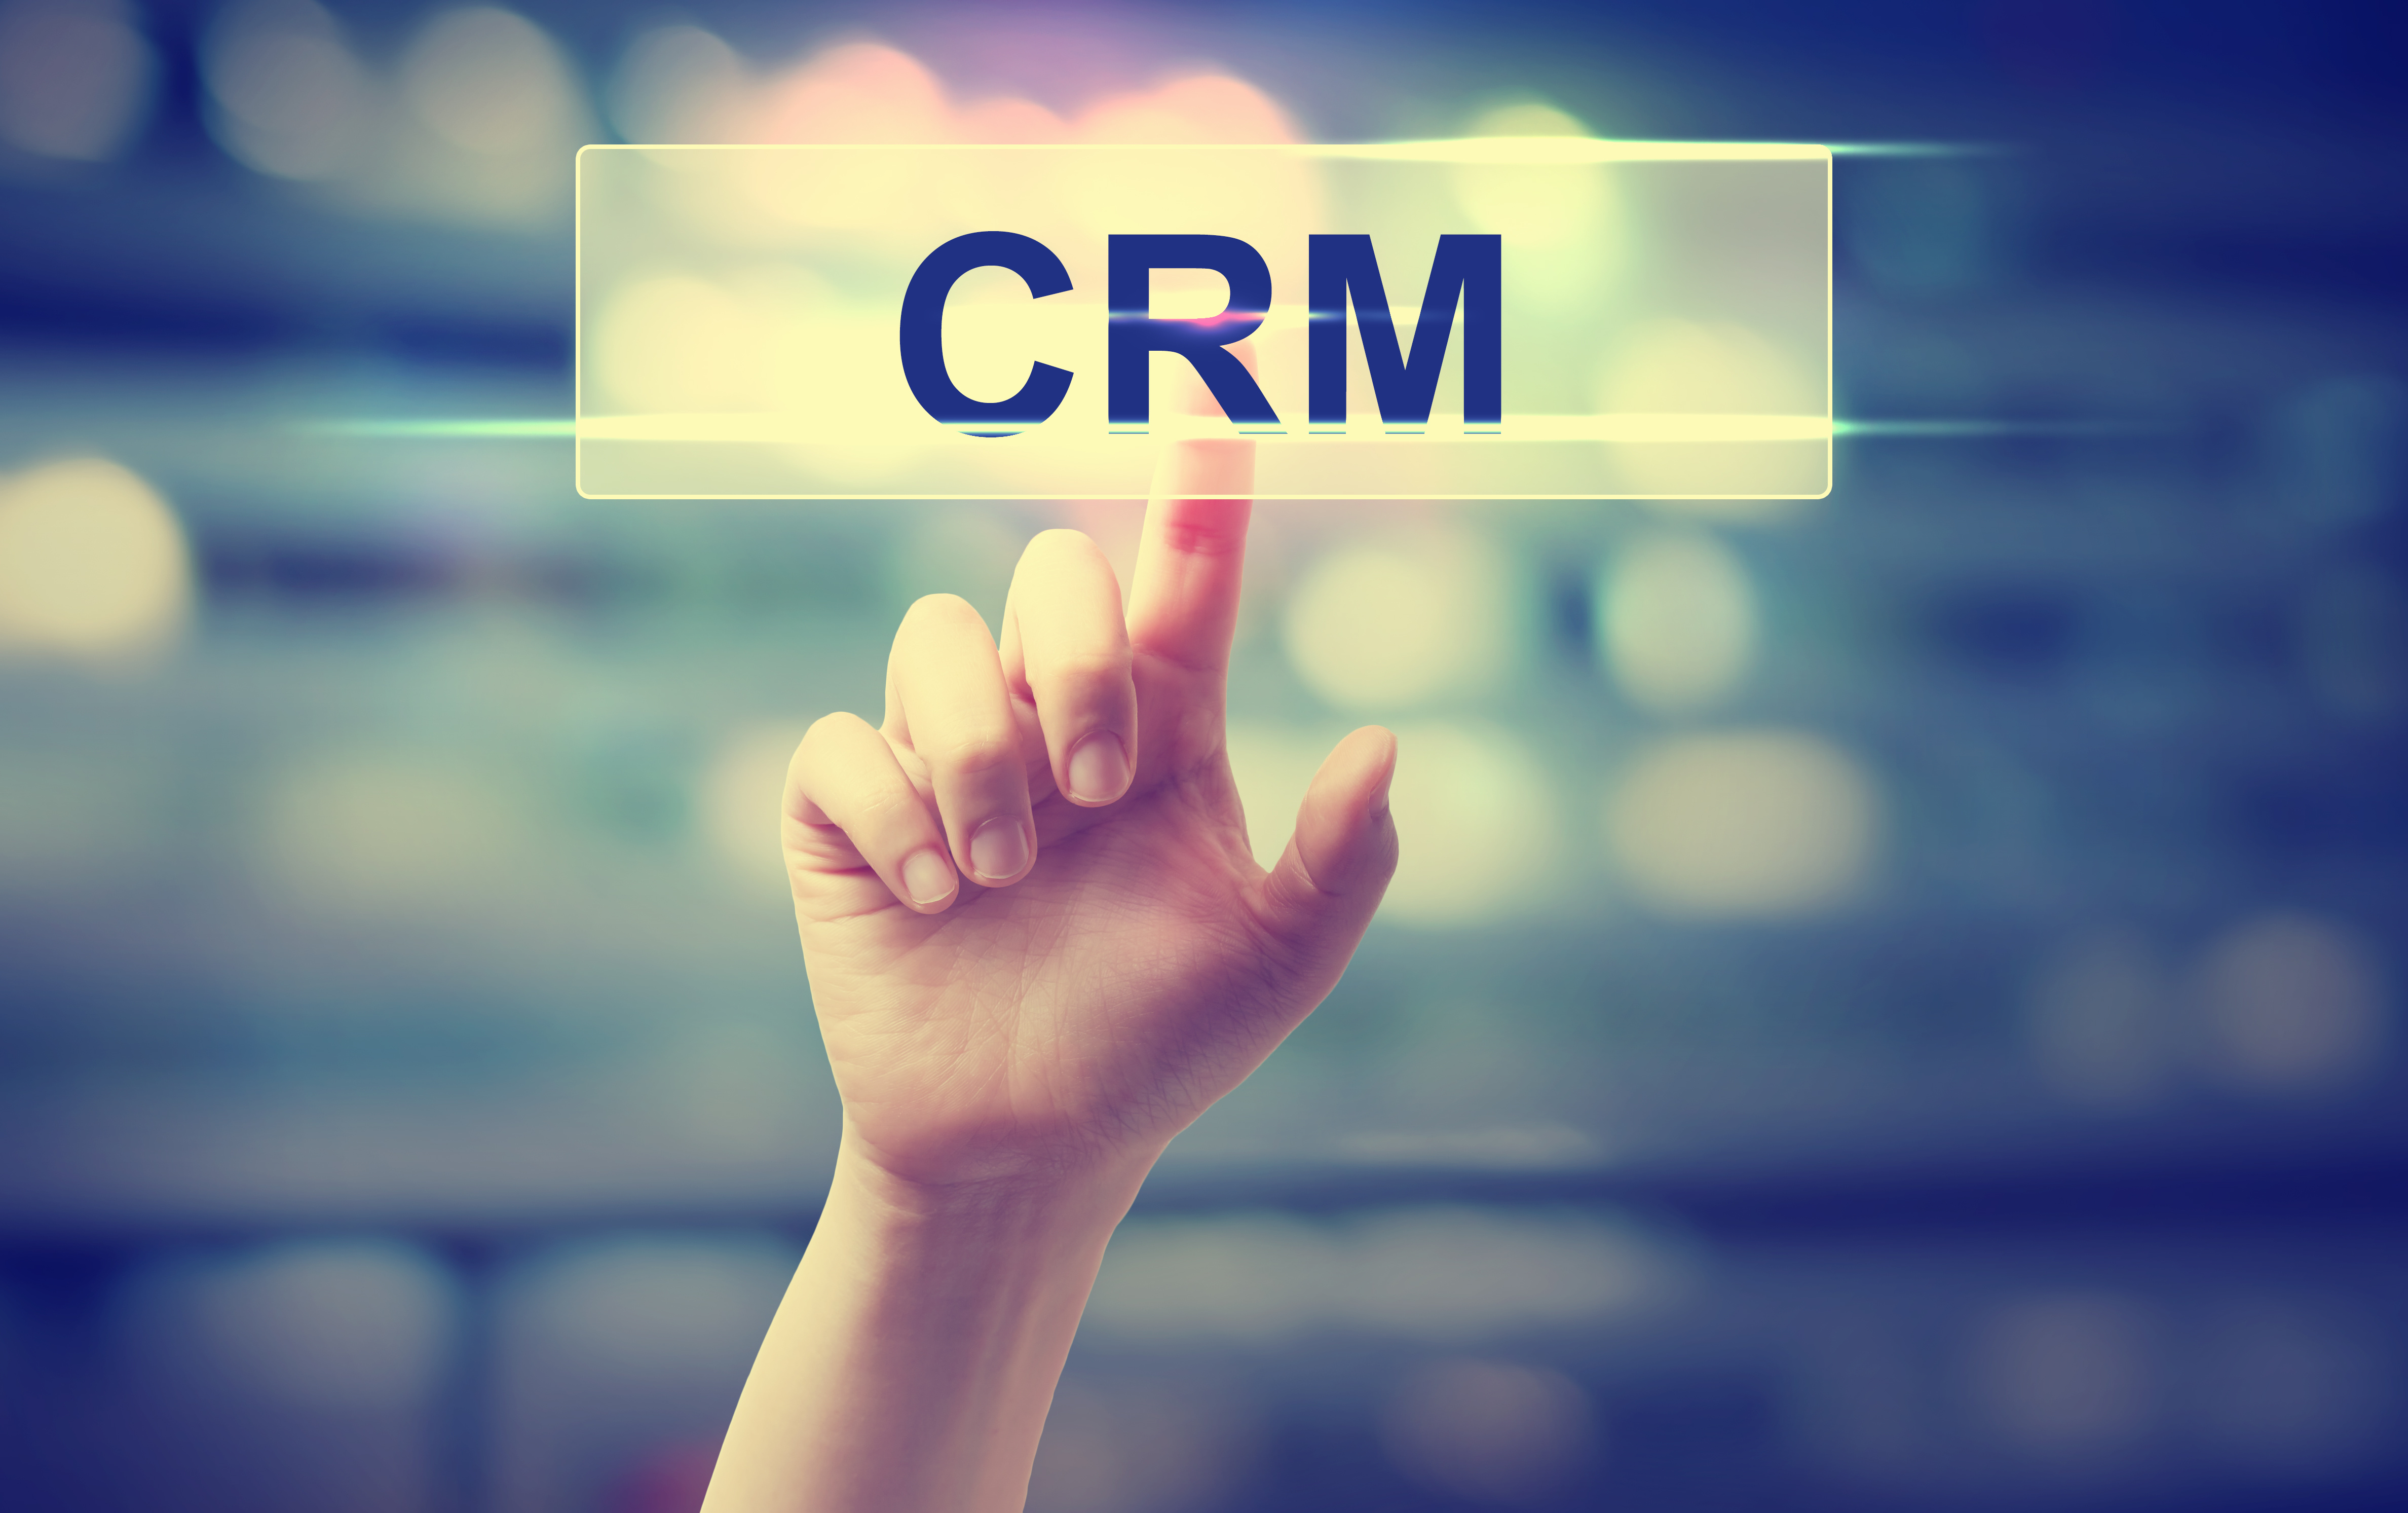 CRM - Customer Relationship Management concept with hand pressing a button on blurred abstract background